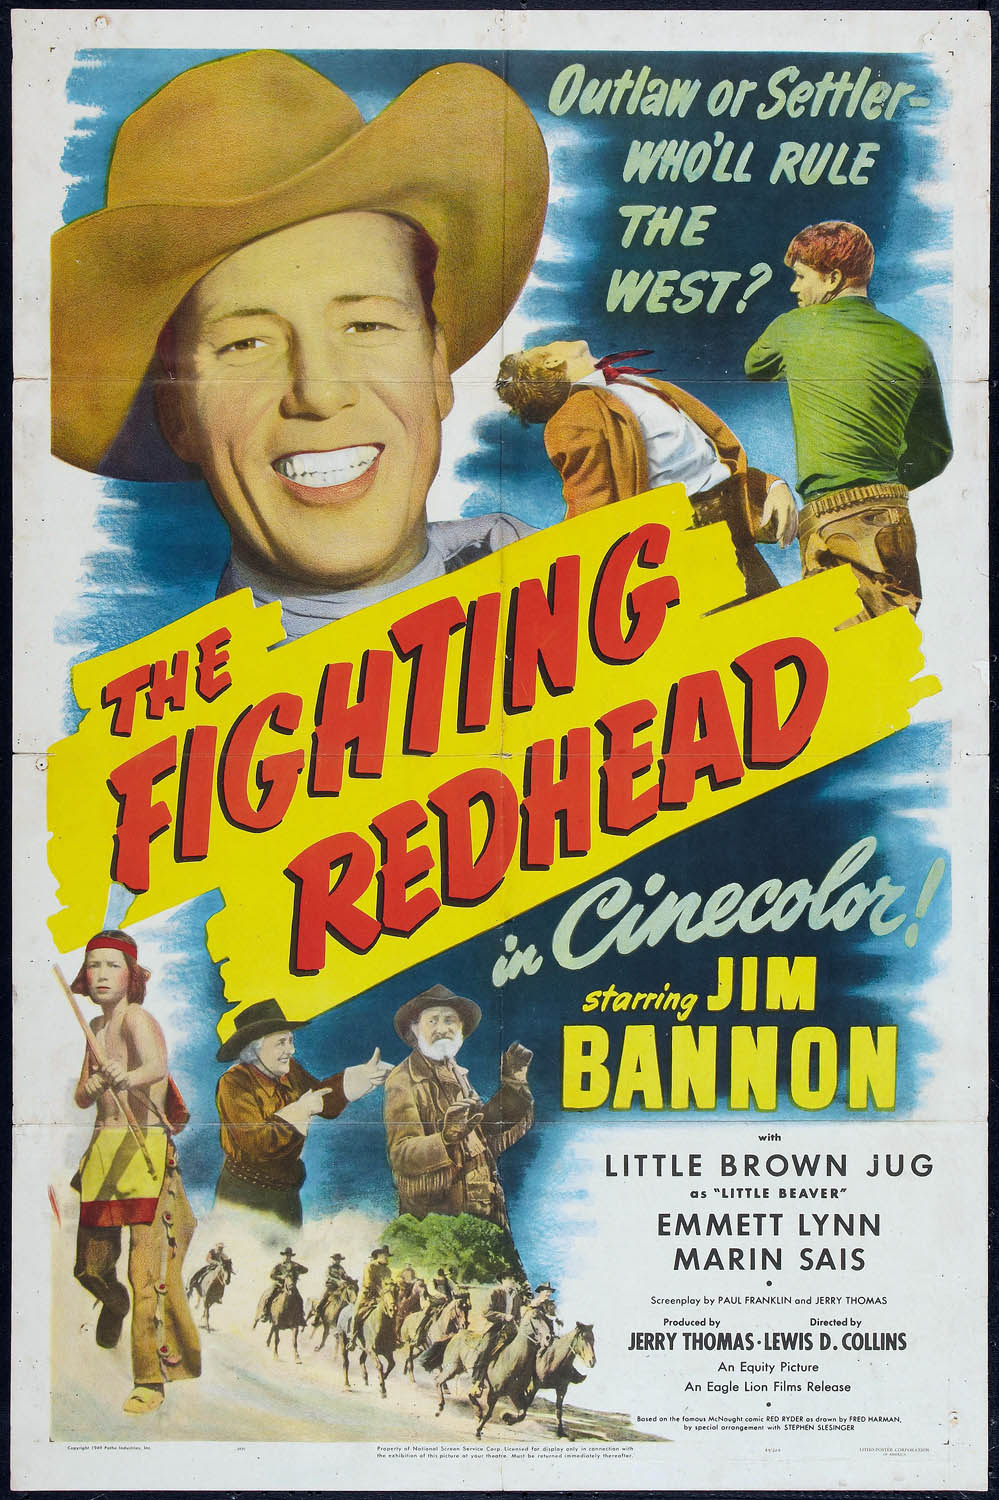 FIGHTING REDHEAD, THE